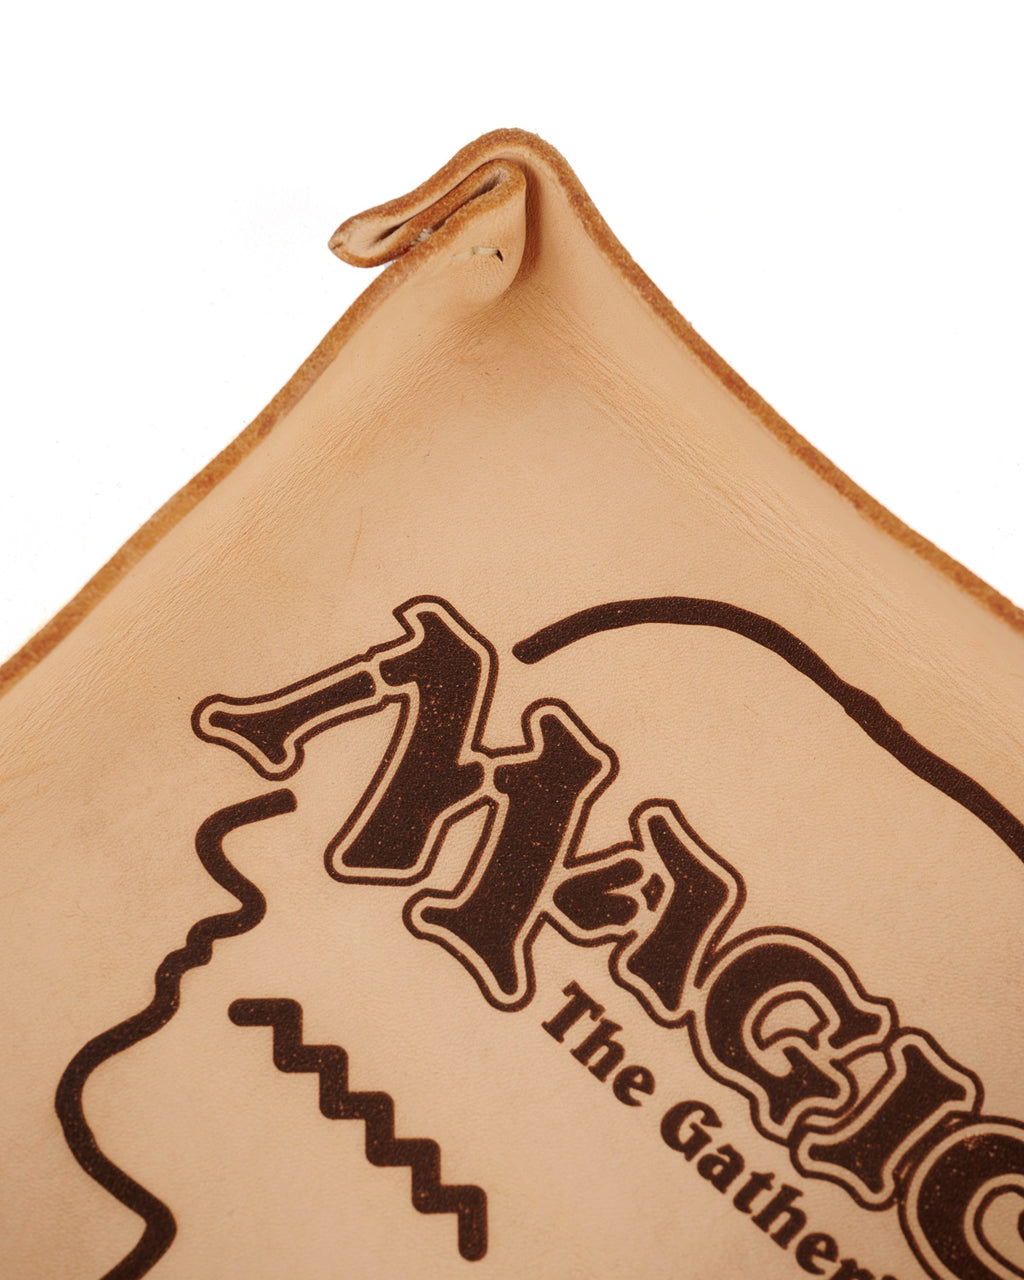 Brain Dead x Magic: The Gathering x Alterior Dice Tray - Natural Tanned Leather 3